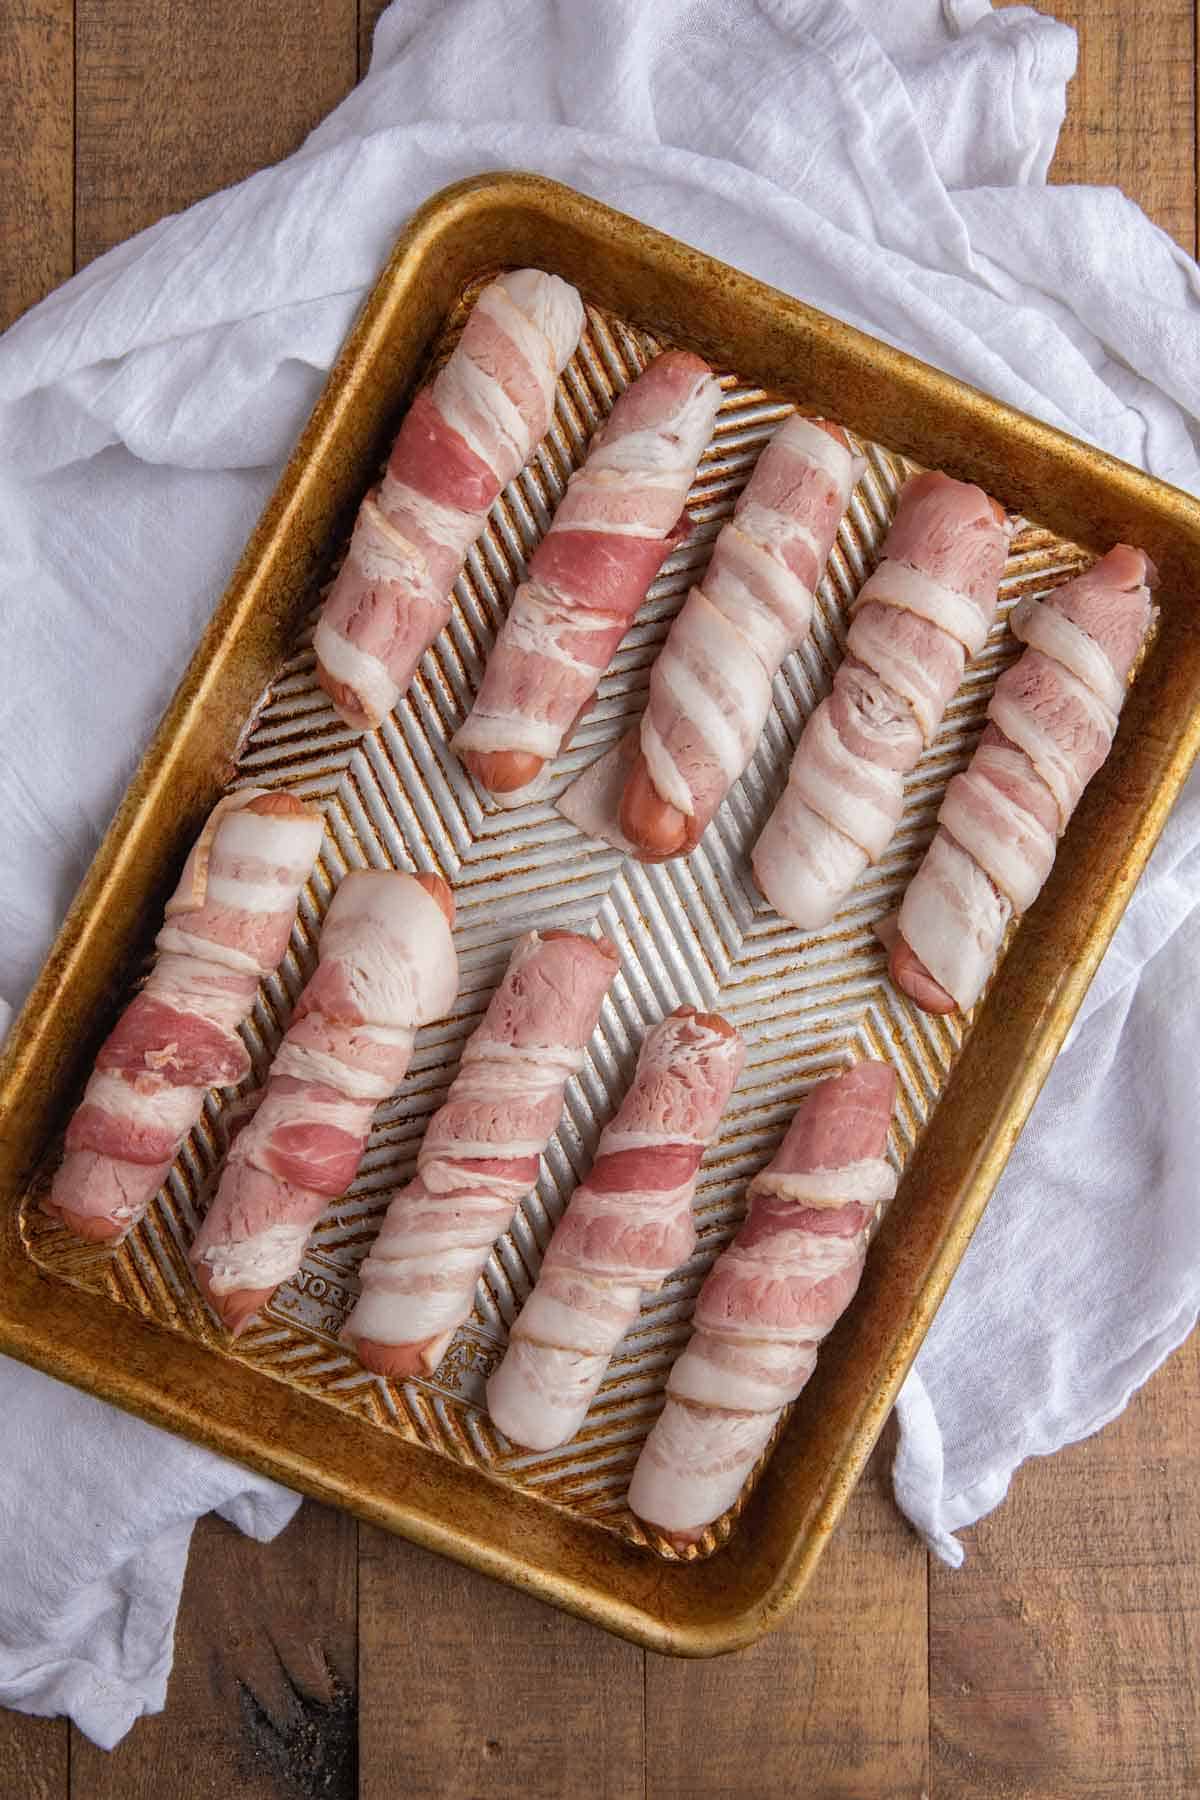 Raw Bacon wrapped around hot dogs